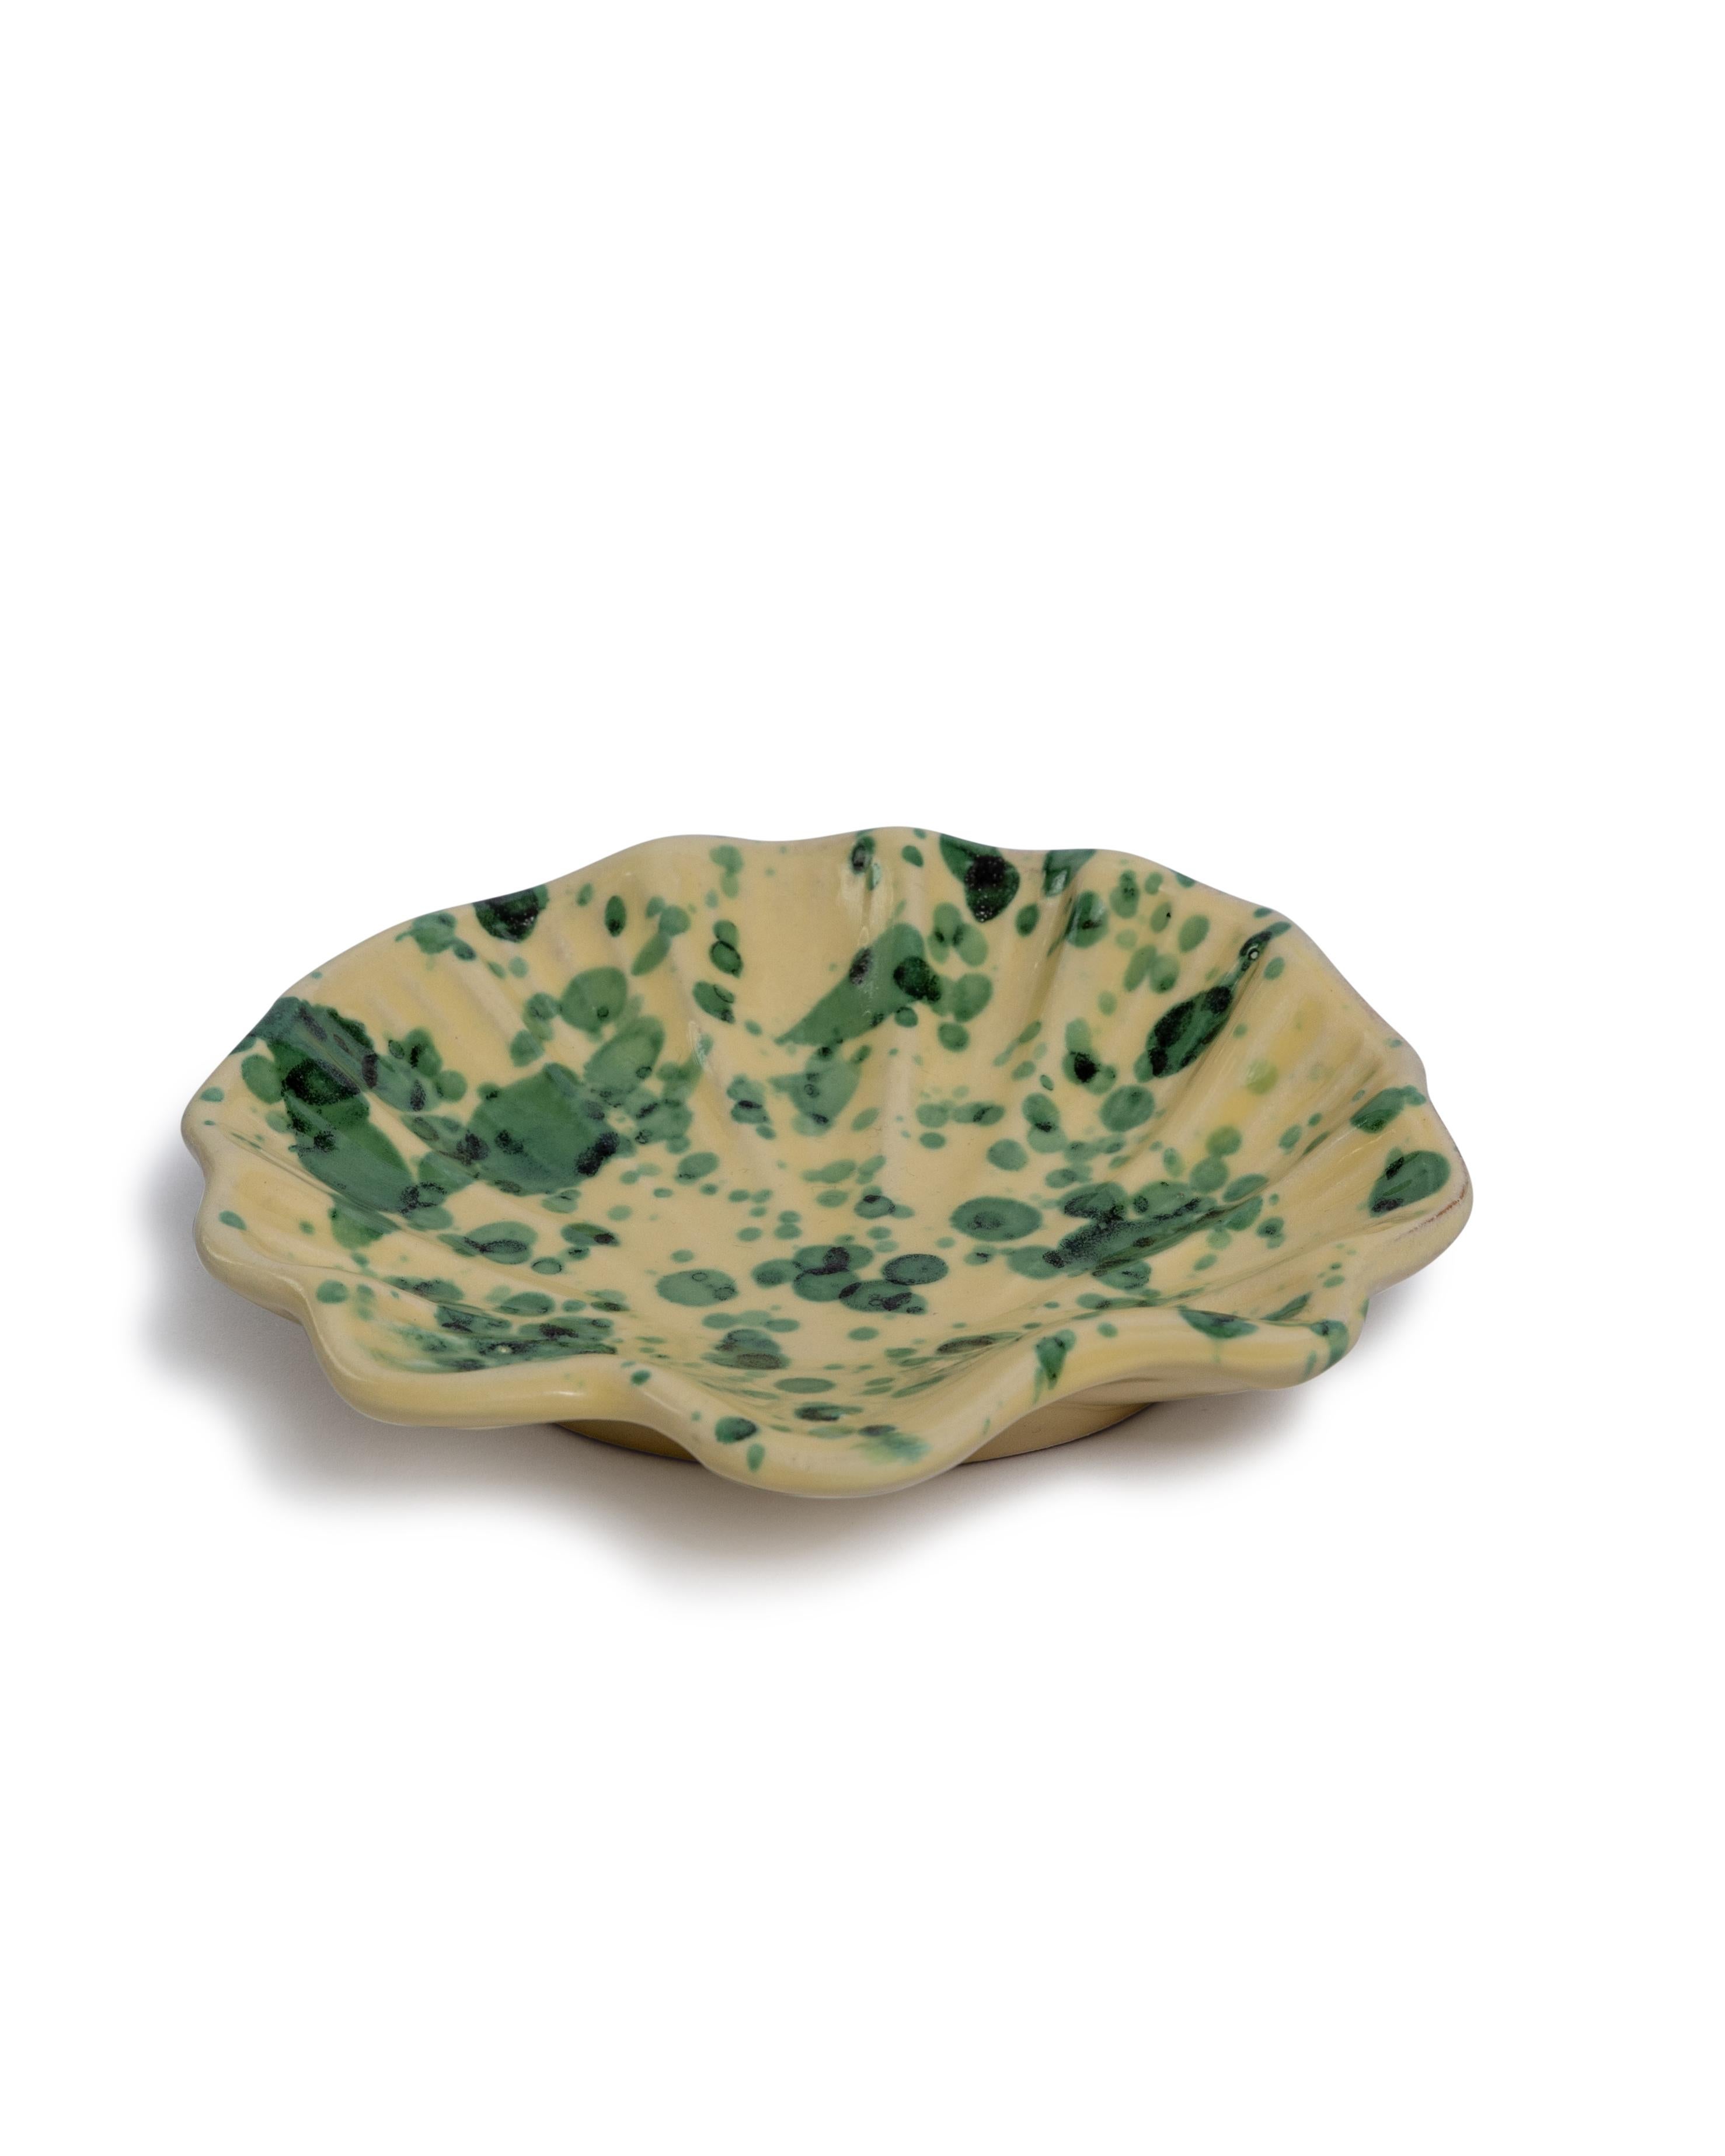 The little shell dish just looks cute anywhere you decide to place it – and it’s a chic gift idea, too. Handmade in Italy, our Coquillage dish comes in pink & blue, verde, or tan & ivory 

15cm L x 12cm W

5.9' L x 4.7' W

Founded by fashion